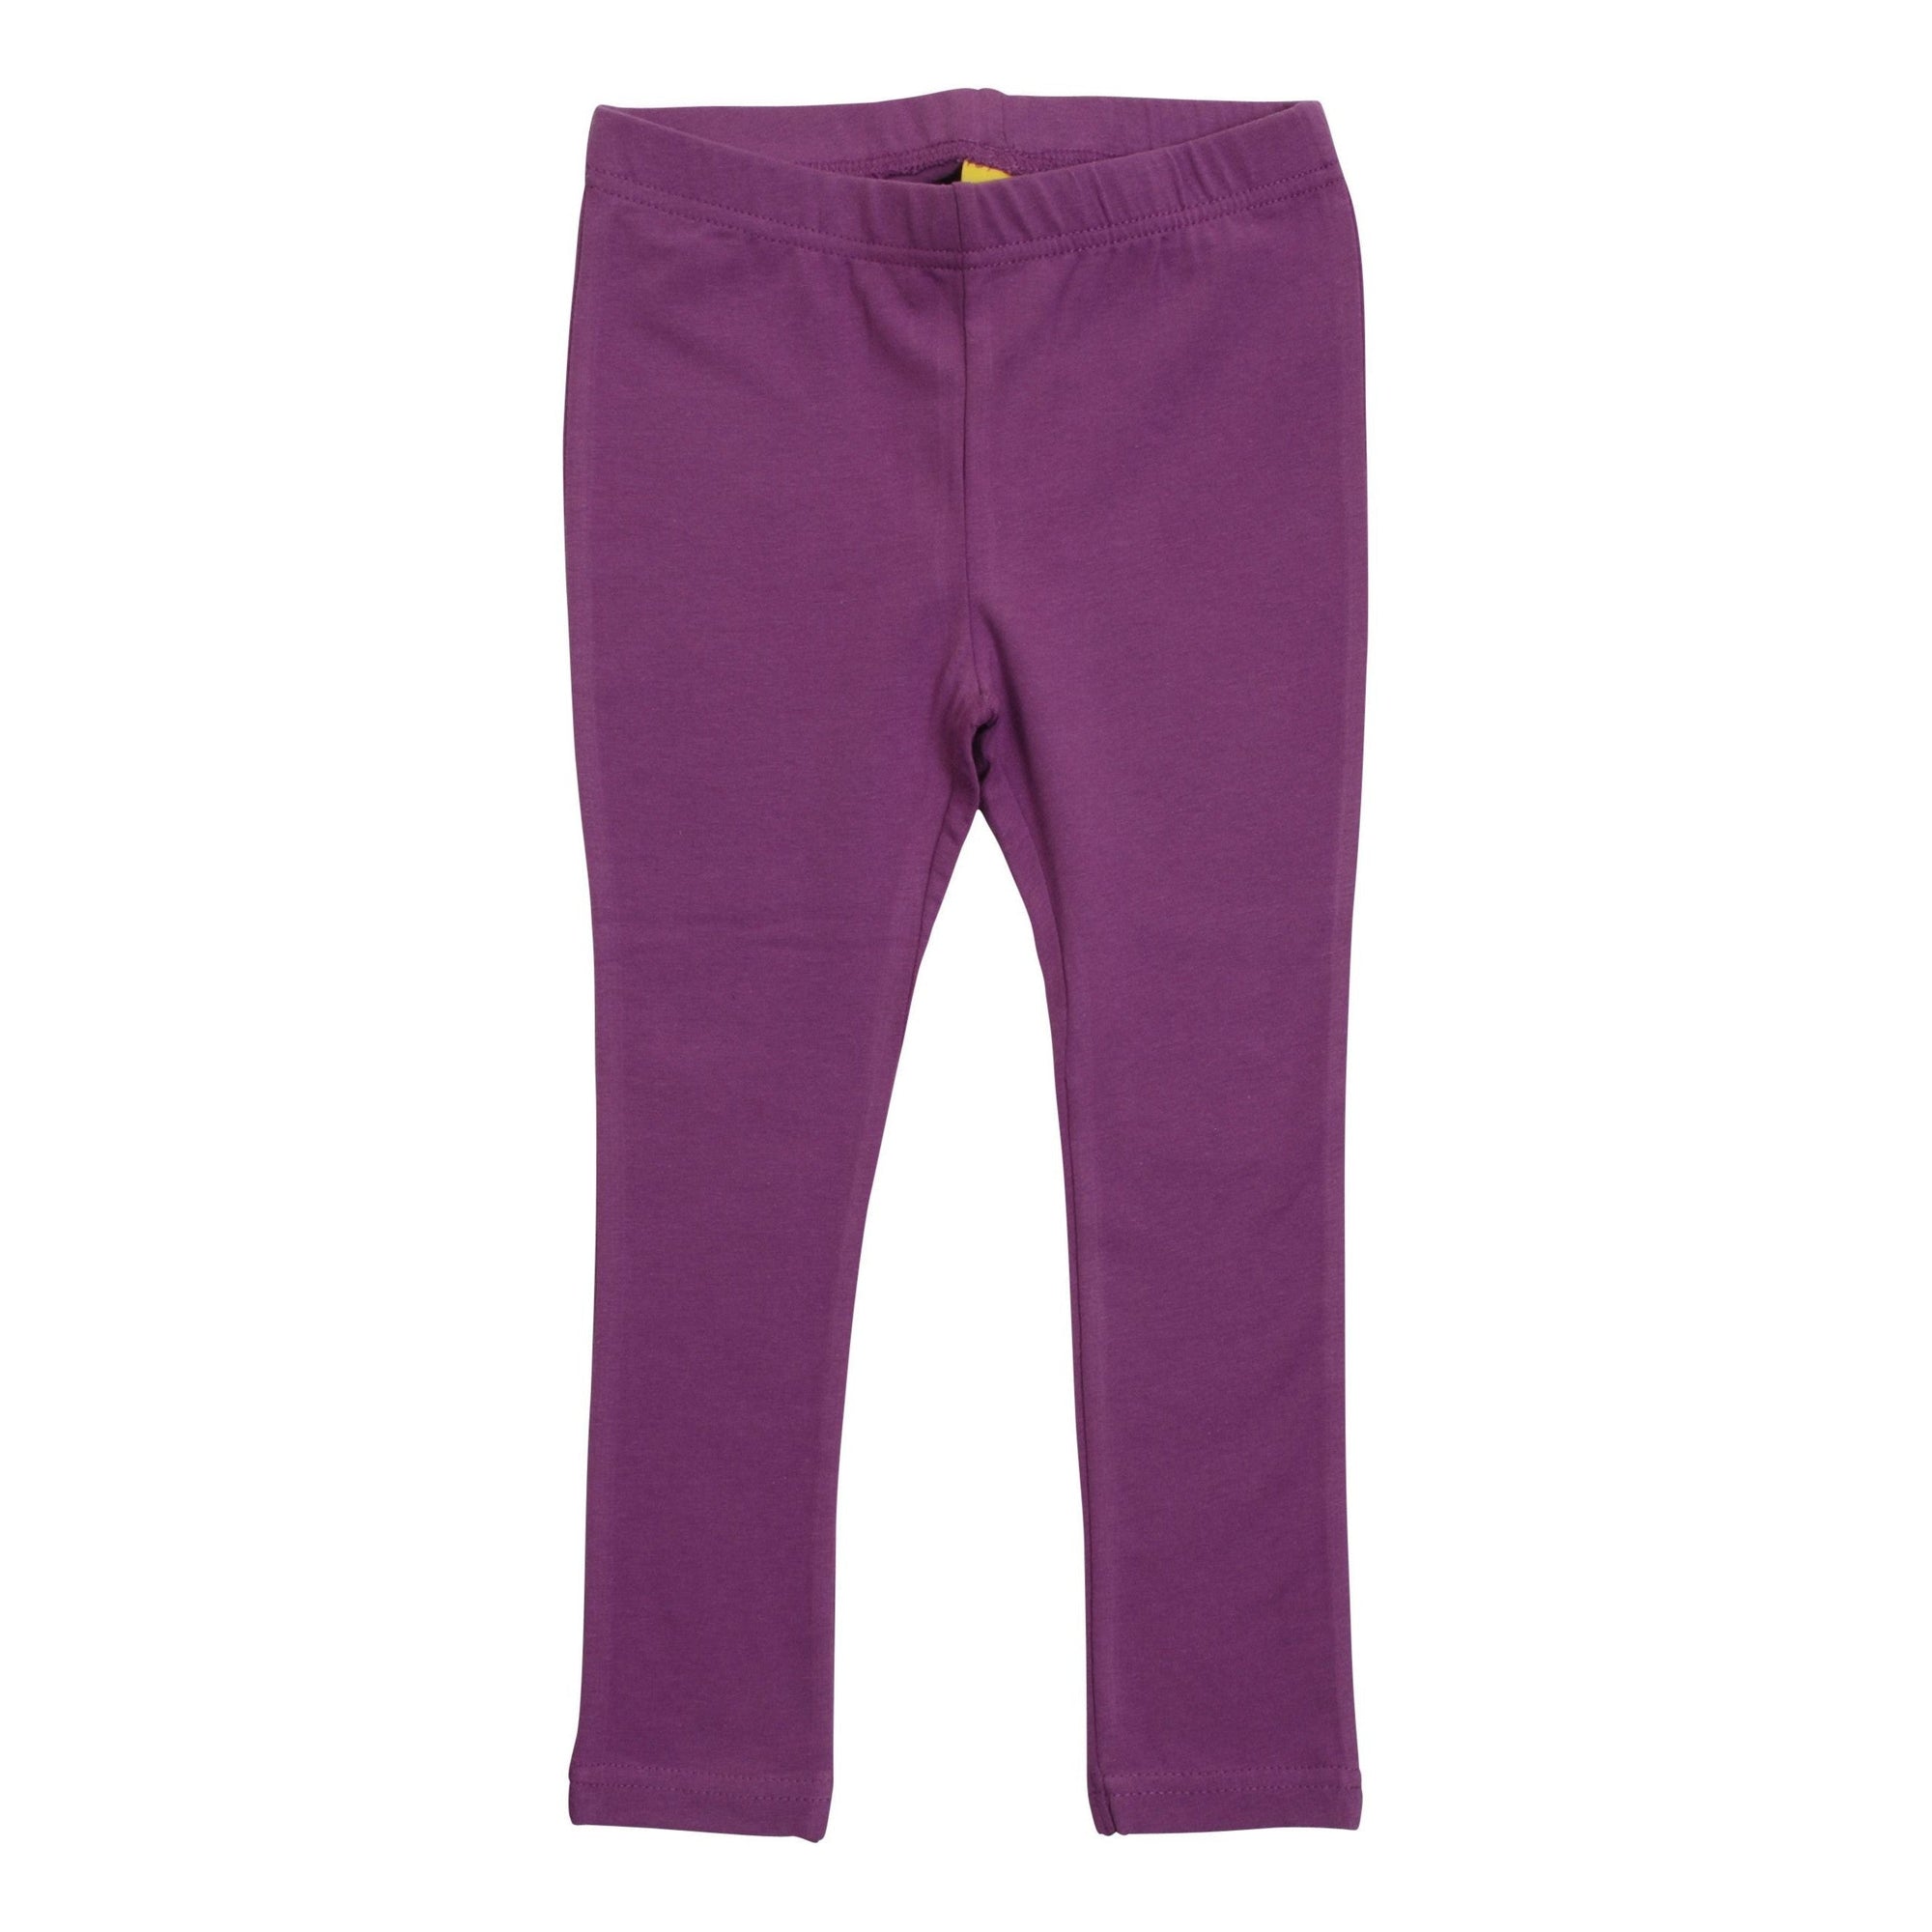 Amethyst Orchid Leggings - 2 Left Size 10-12 years-More Than A Fling-Modern Rascals